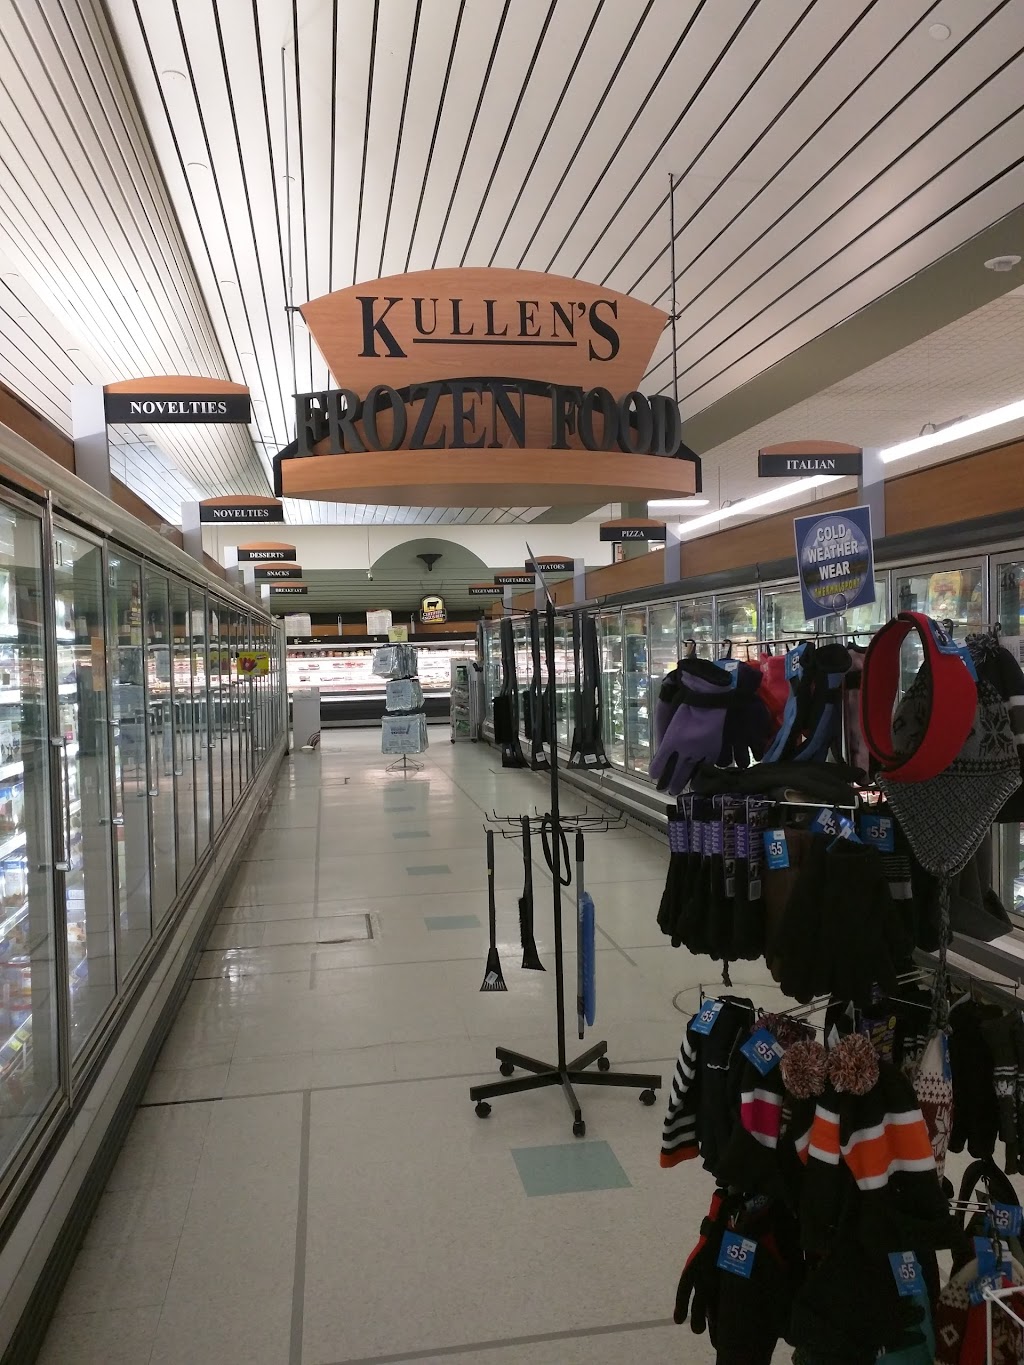 King Kullen | 1235 Middle Country Rd, Middle Island, NY 11953 | Phone: (631) 924-0402